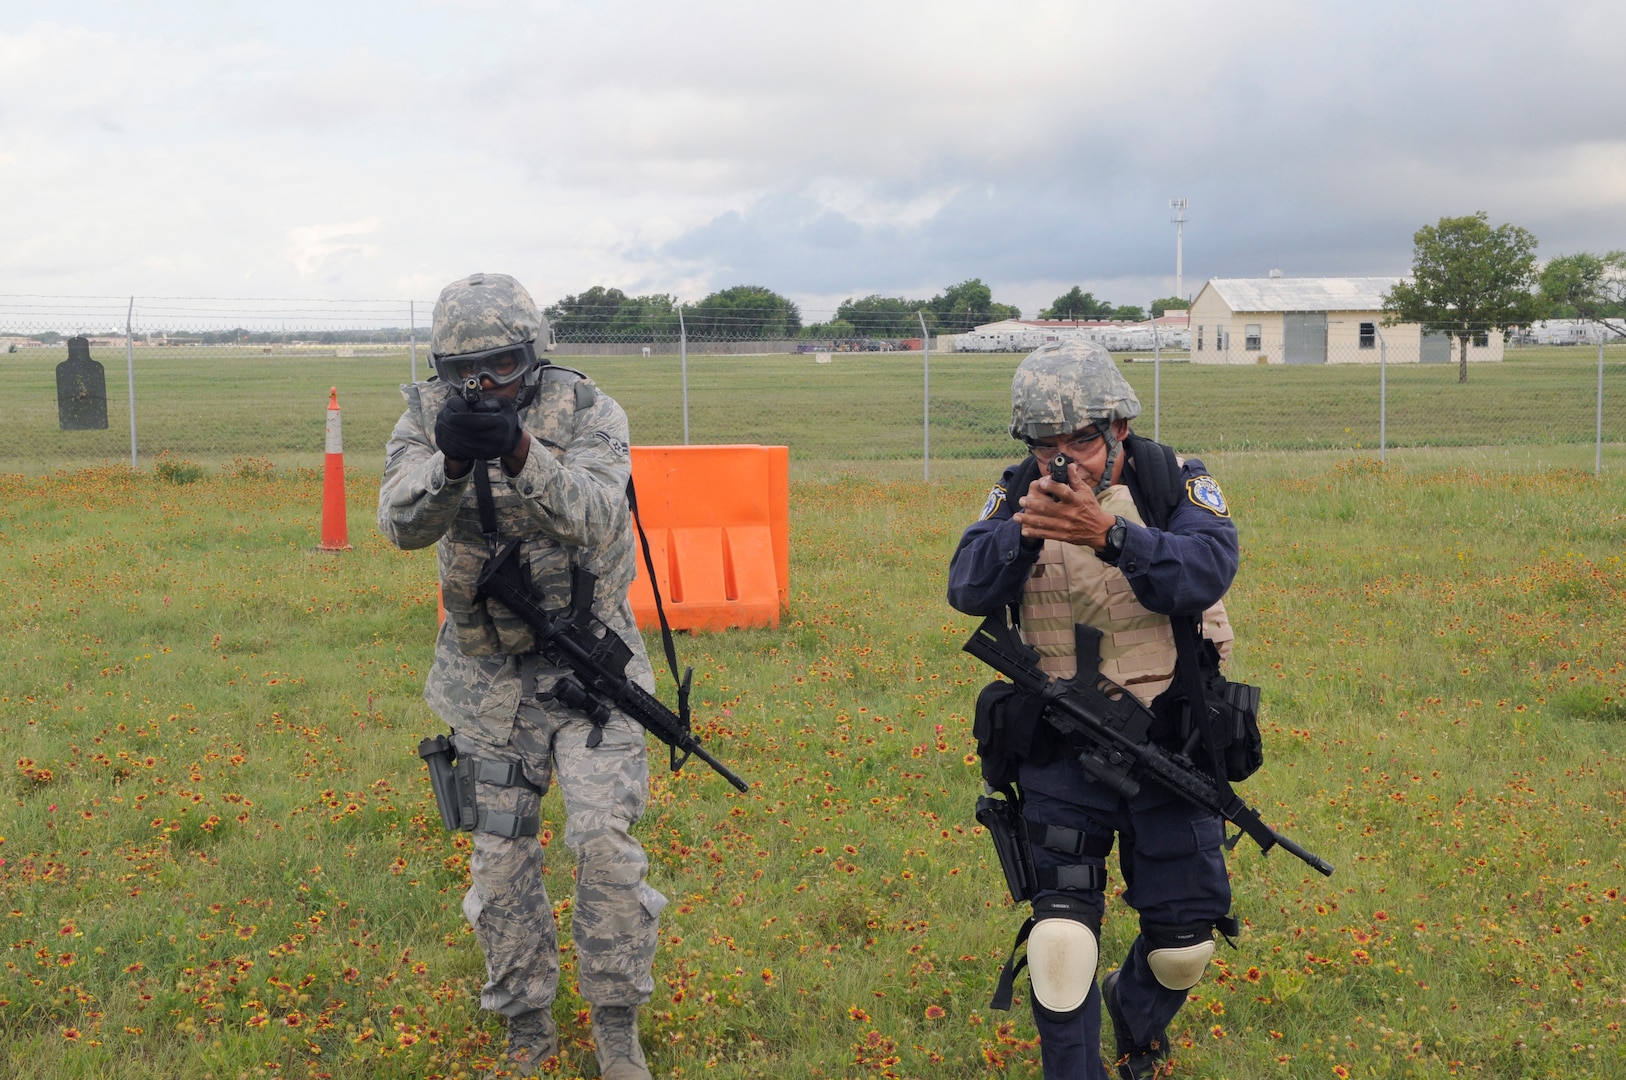 Airman 1st Class Martin and Officer Agapito Delarosa, 902nd Security Forces Squadron installation police officers, move toward their target during Shoot, Move and Communicate training at Camp Talon on Joint Base San Antonio- Randolph, June 7.  (U.S. Air Force Photo by Don Lindsey)